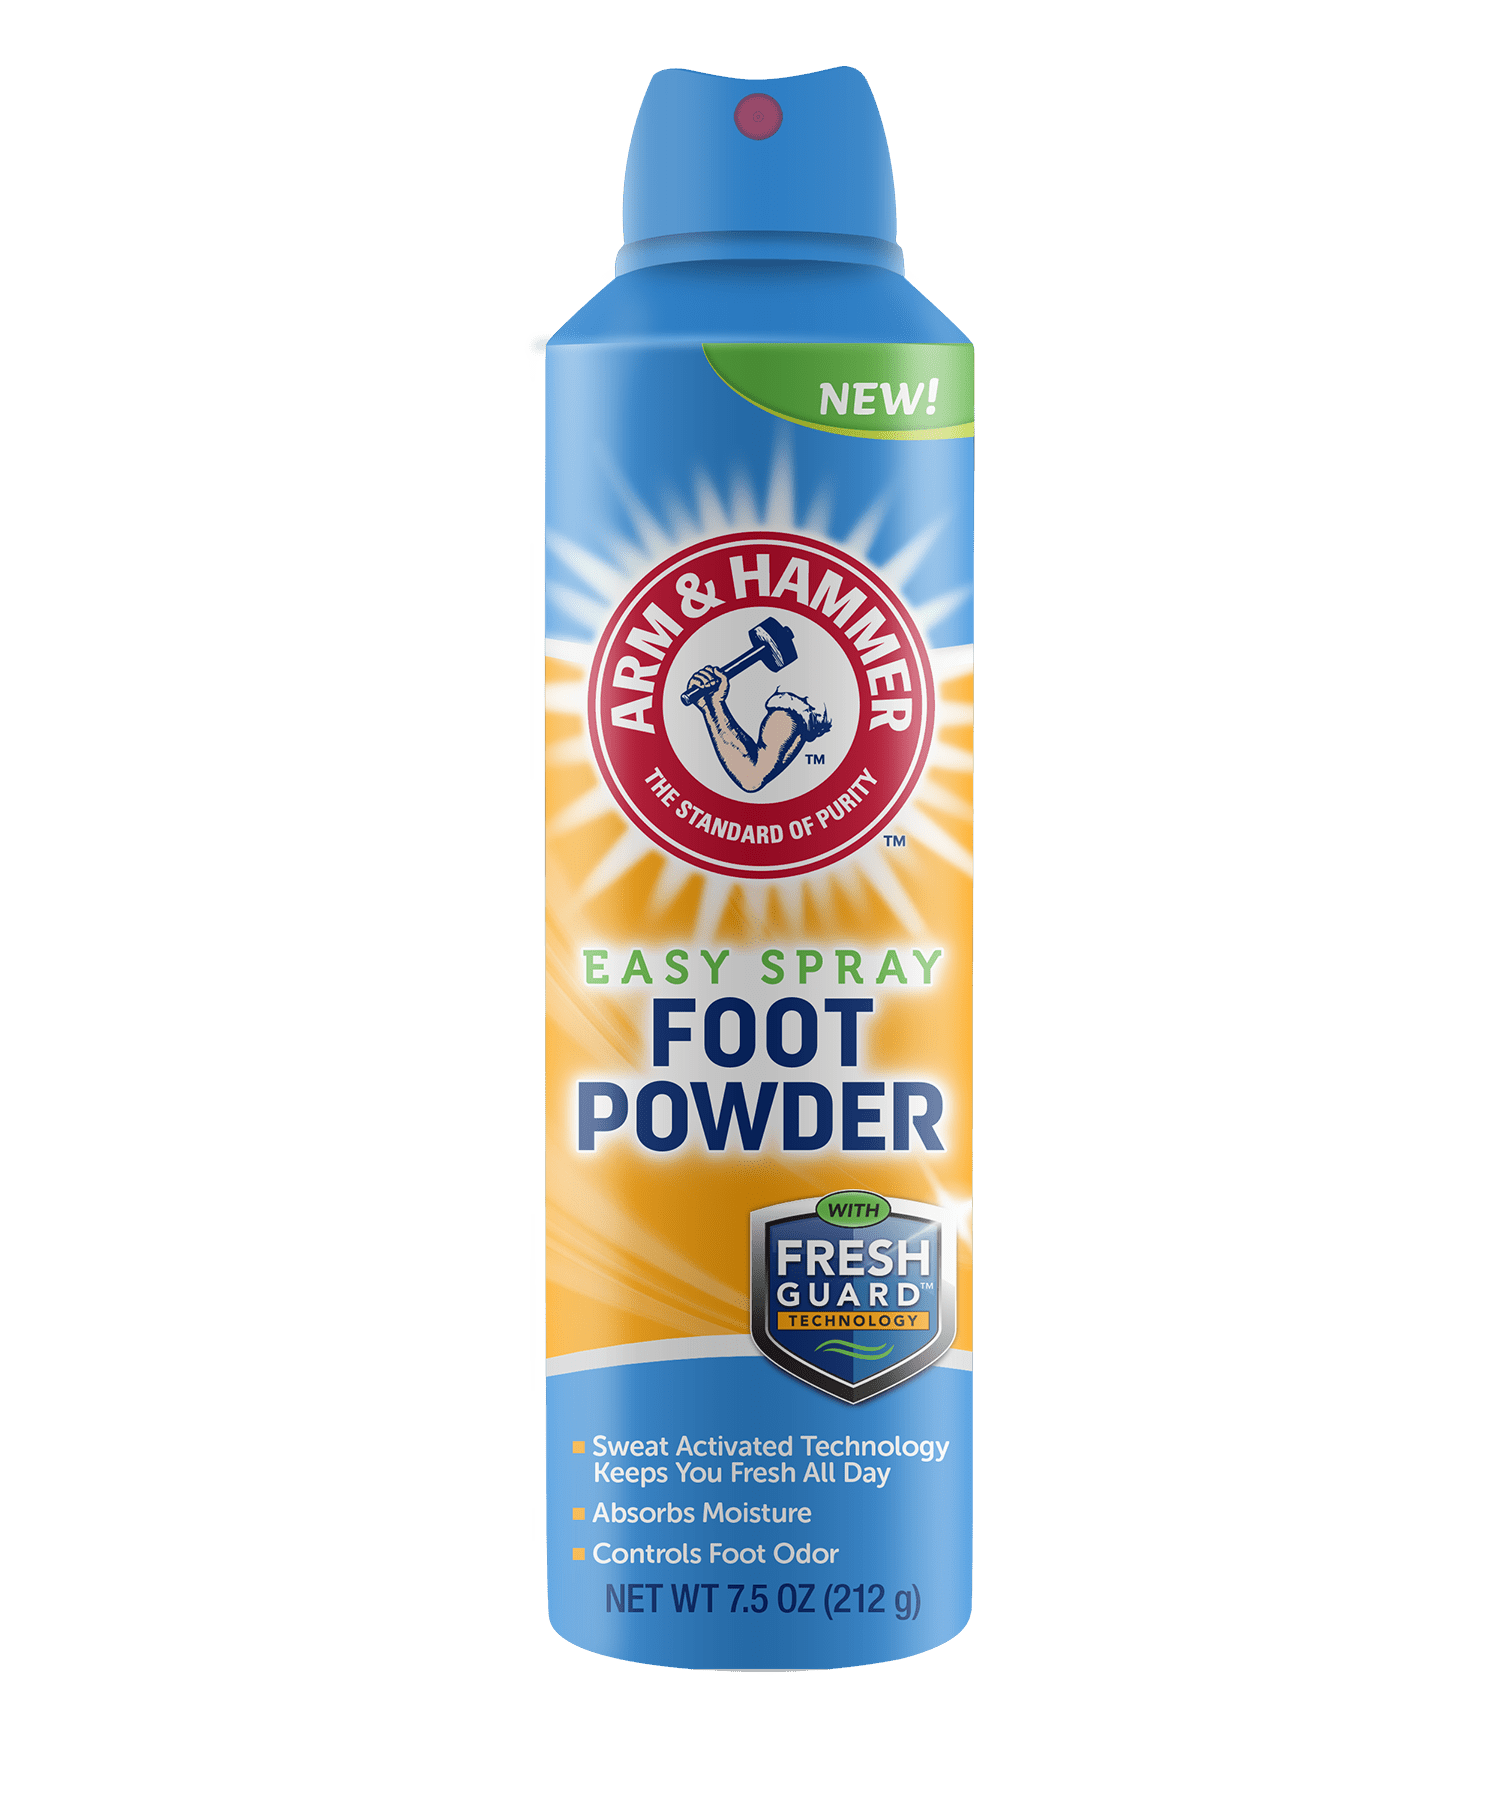 Arm & Hammer Foot Care for those who work hard and play hard